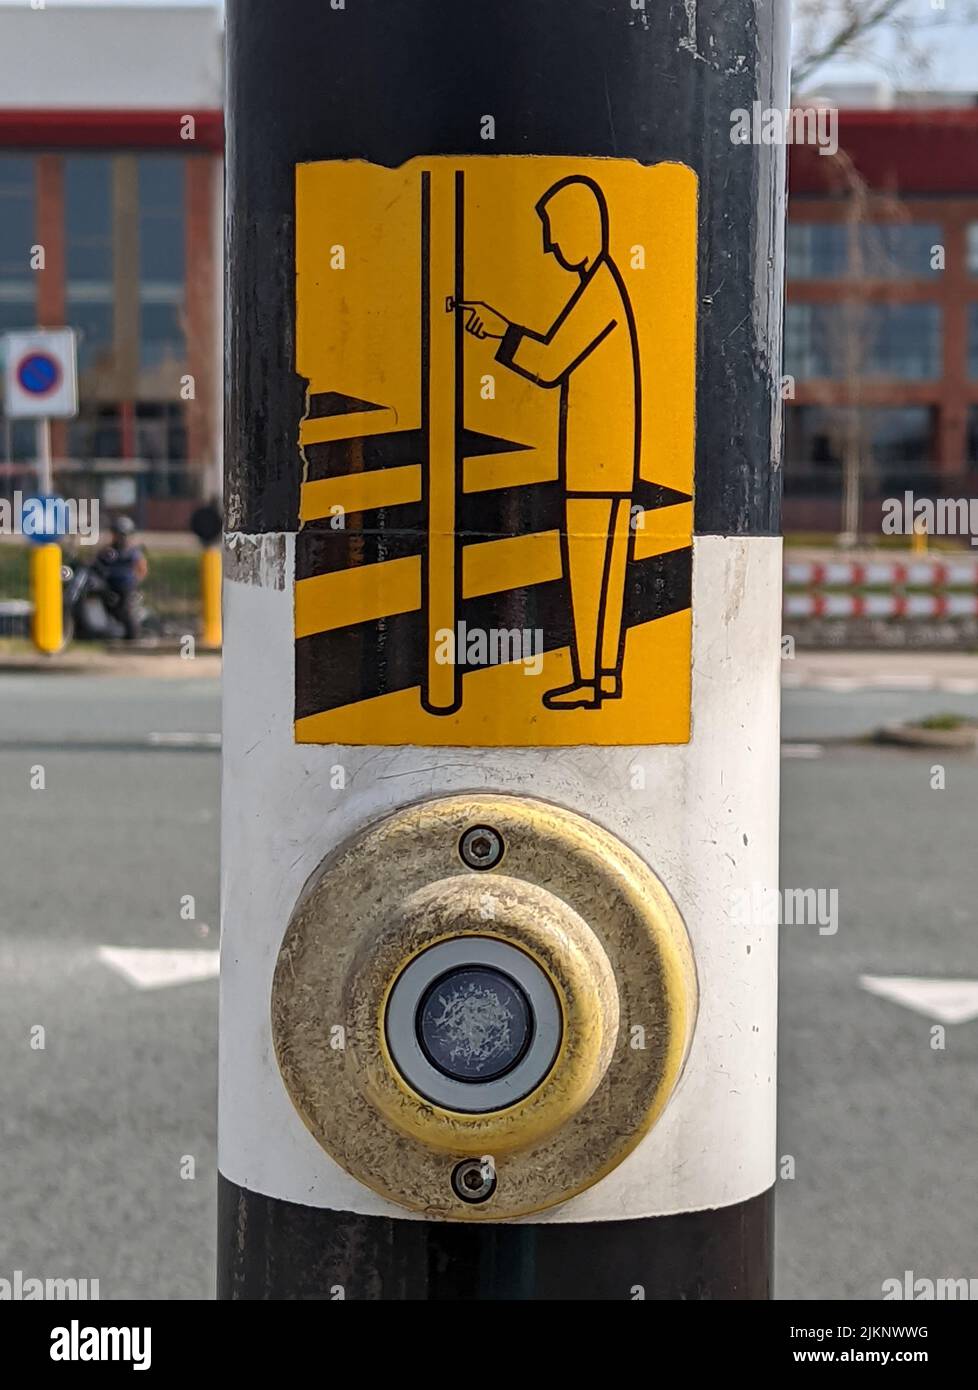 A vertical shot of a pedestrian pushbutton on a pole with a yellow person icon Stock Photo